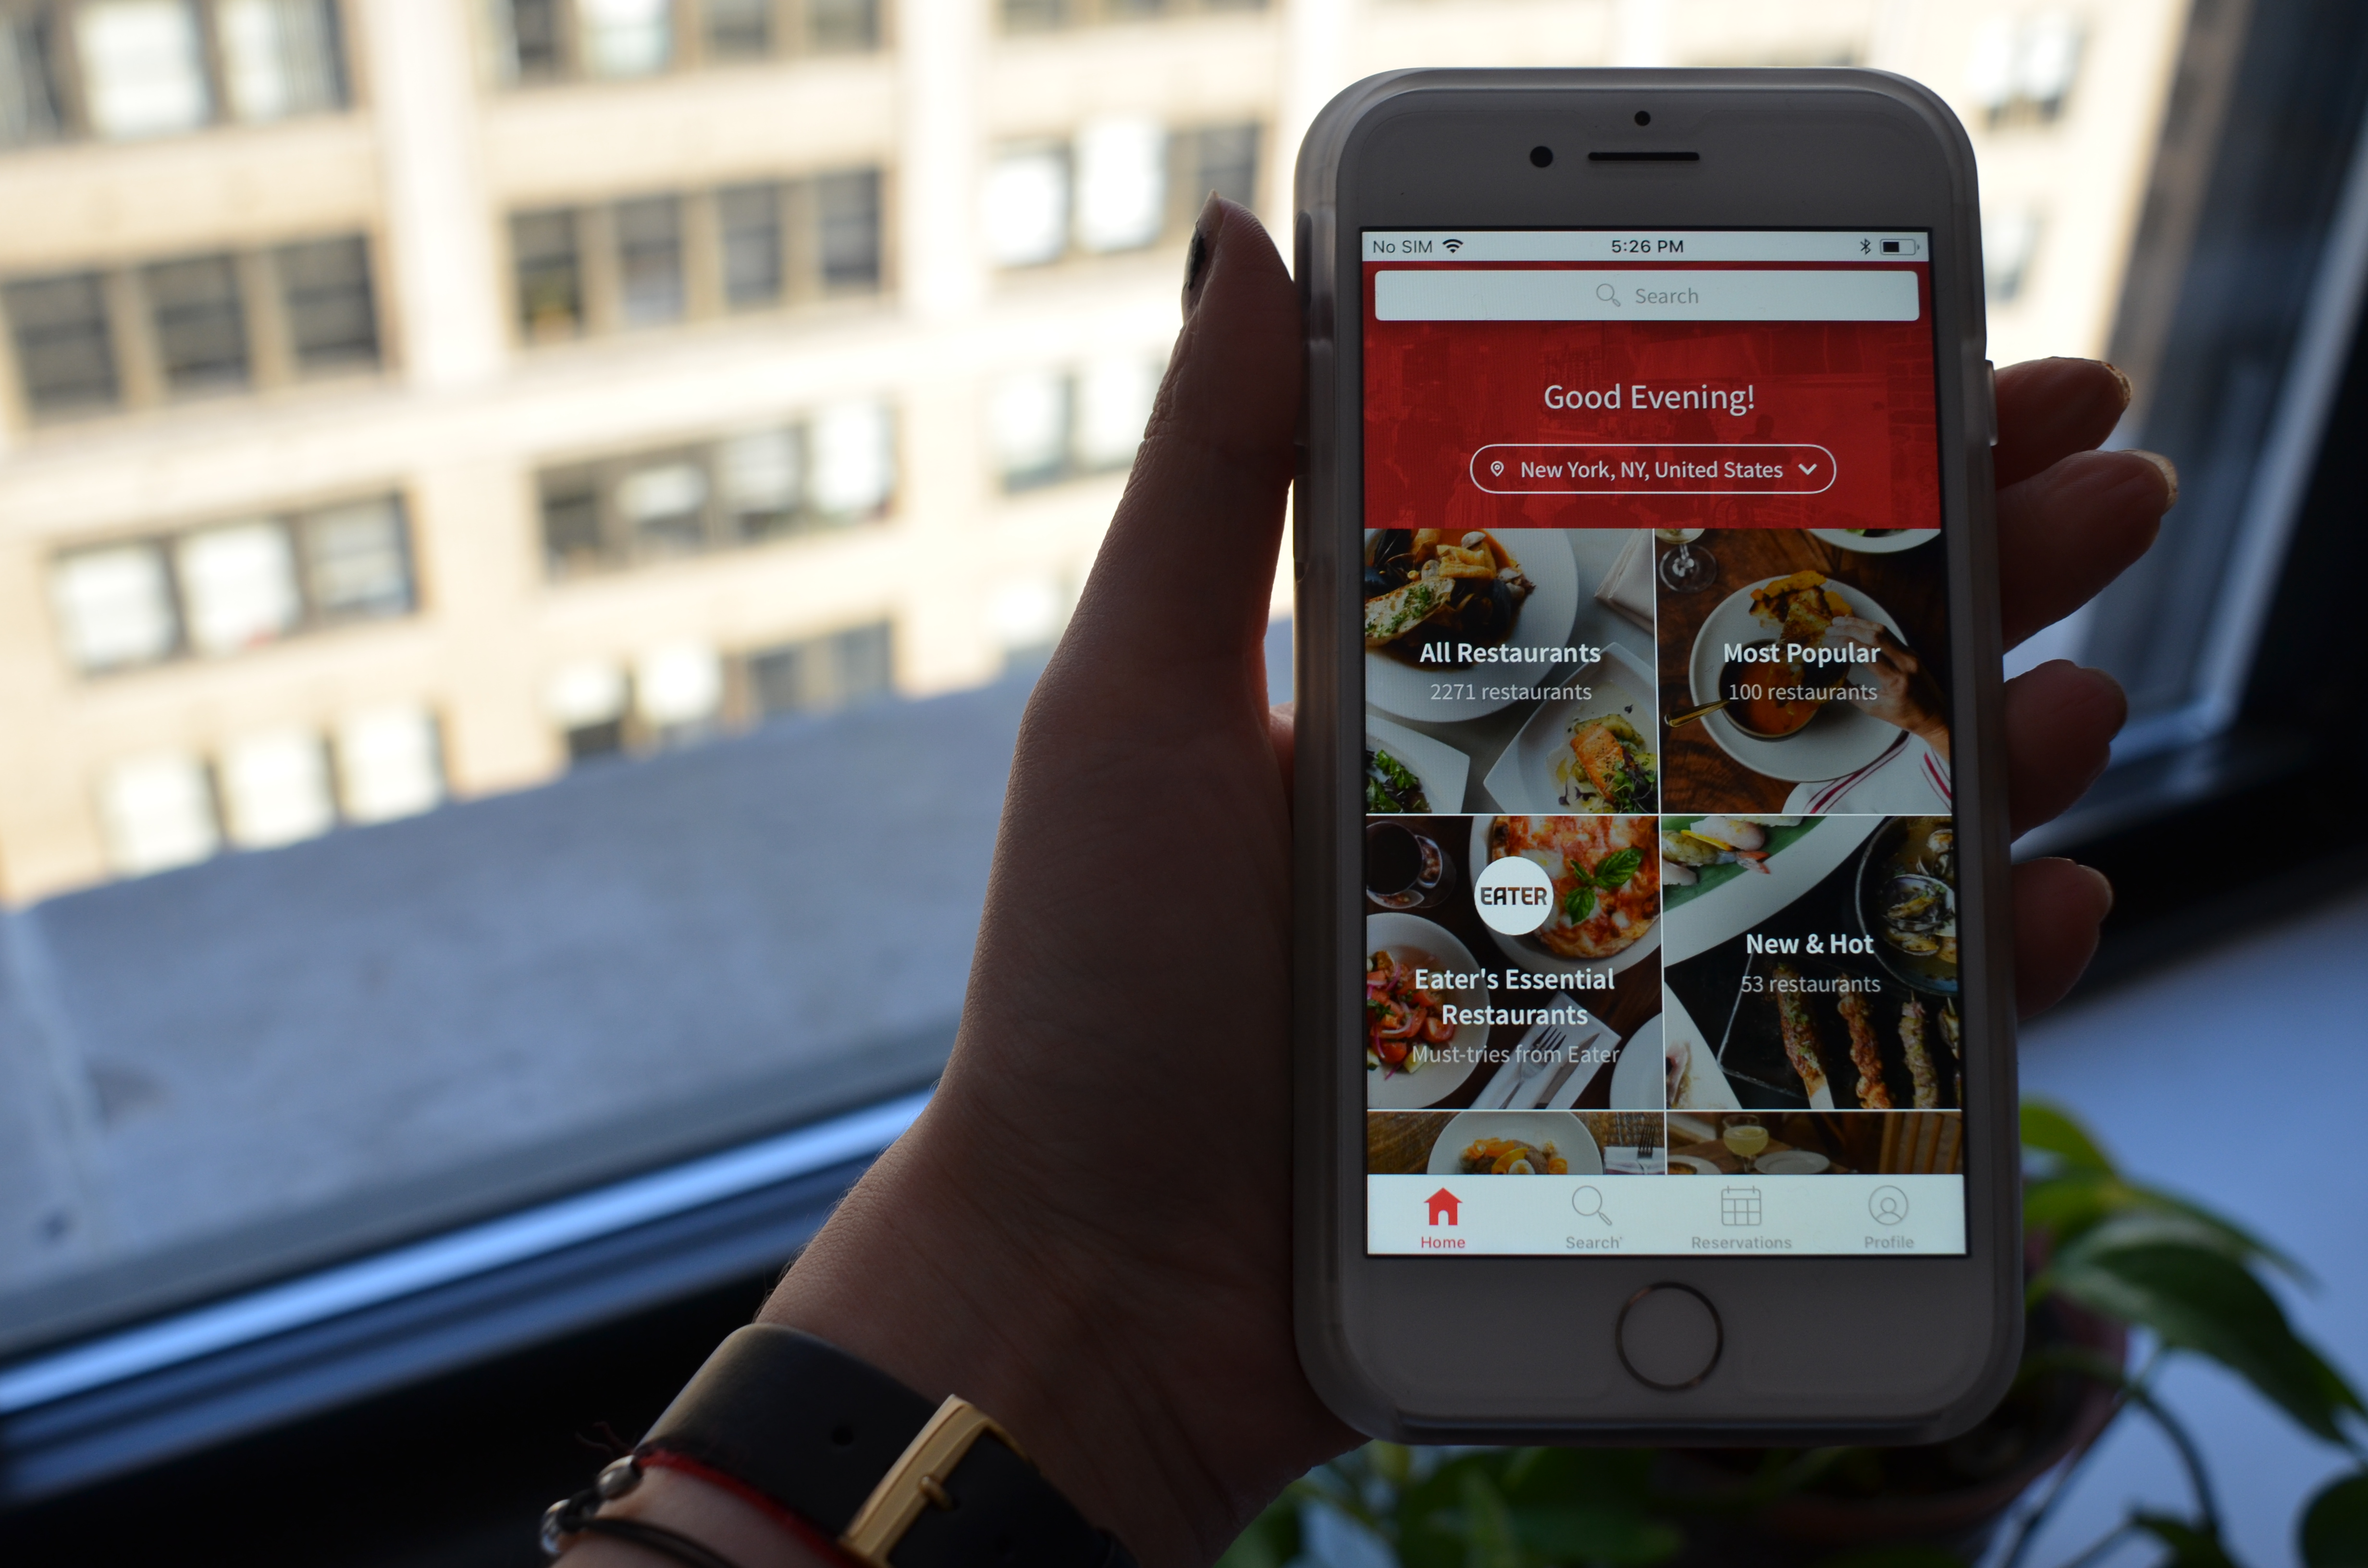 OpenTable (@opentable) • Instagram photos and videos